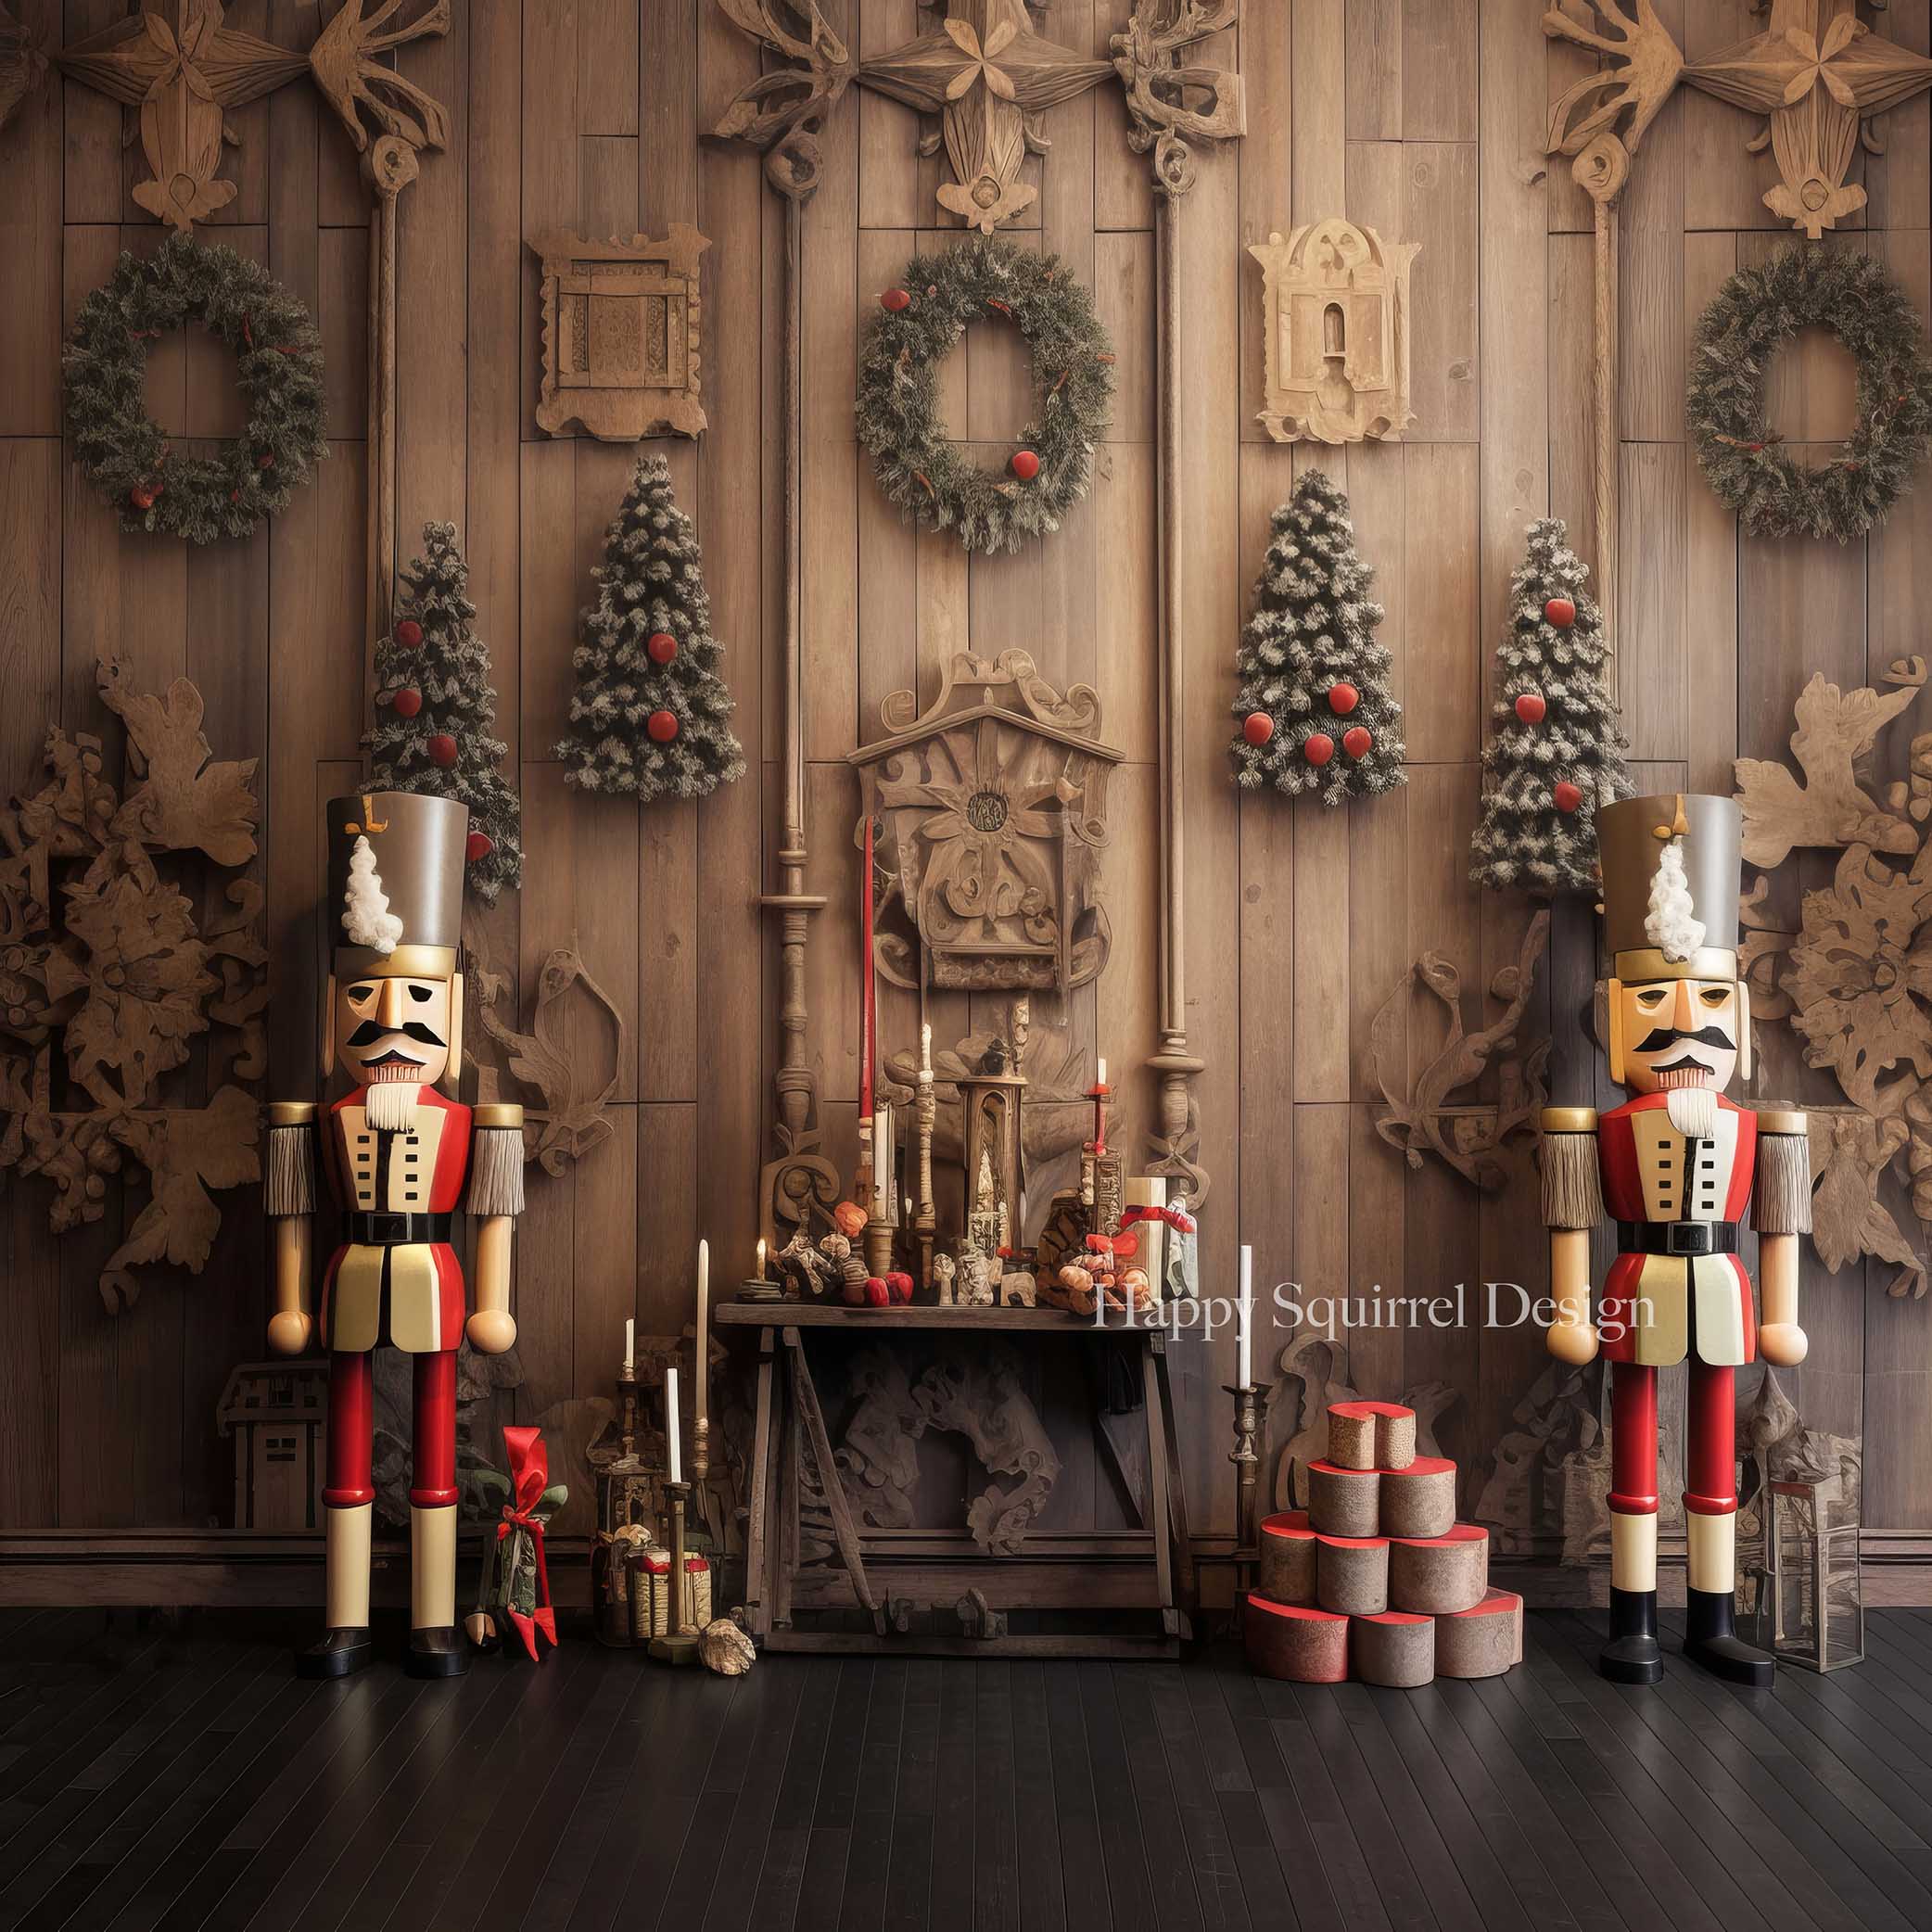 Kate Christmas Wooden Nutcraker Wall Backdrop Designed by Happy Squirrel Design